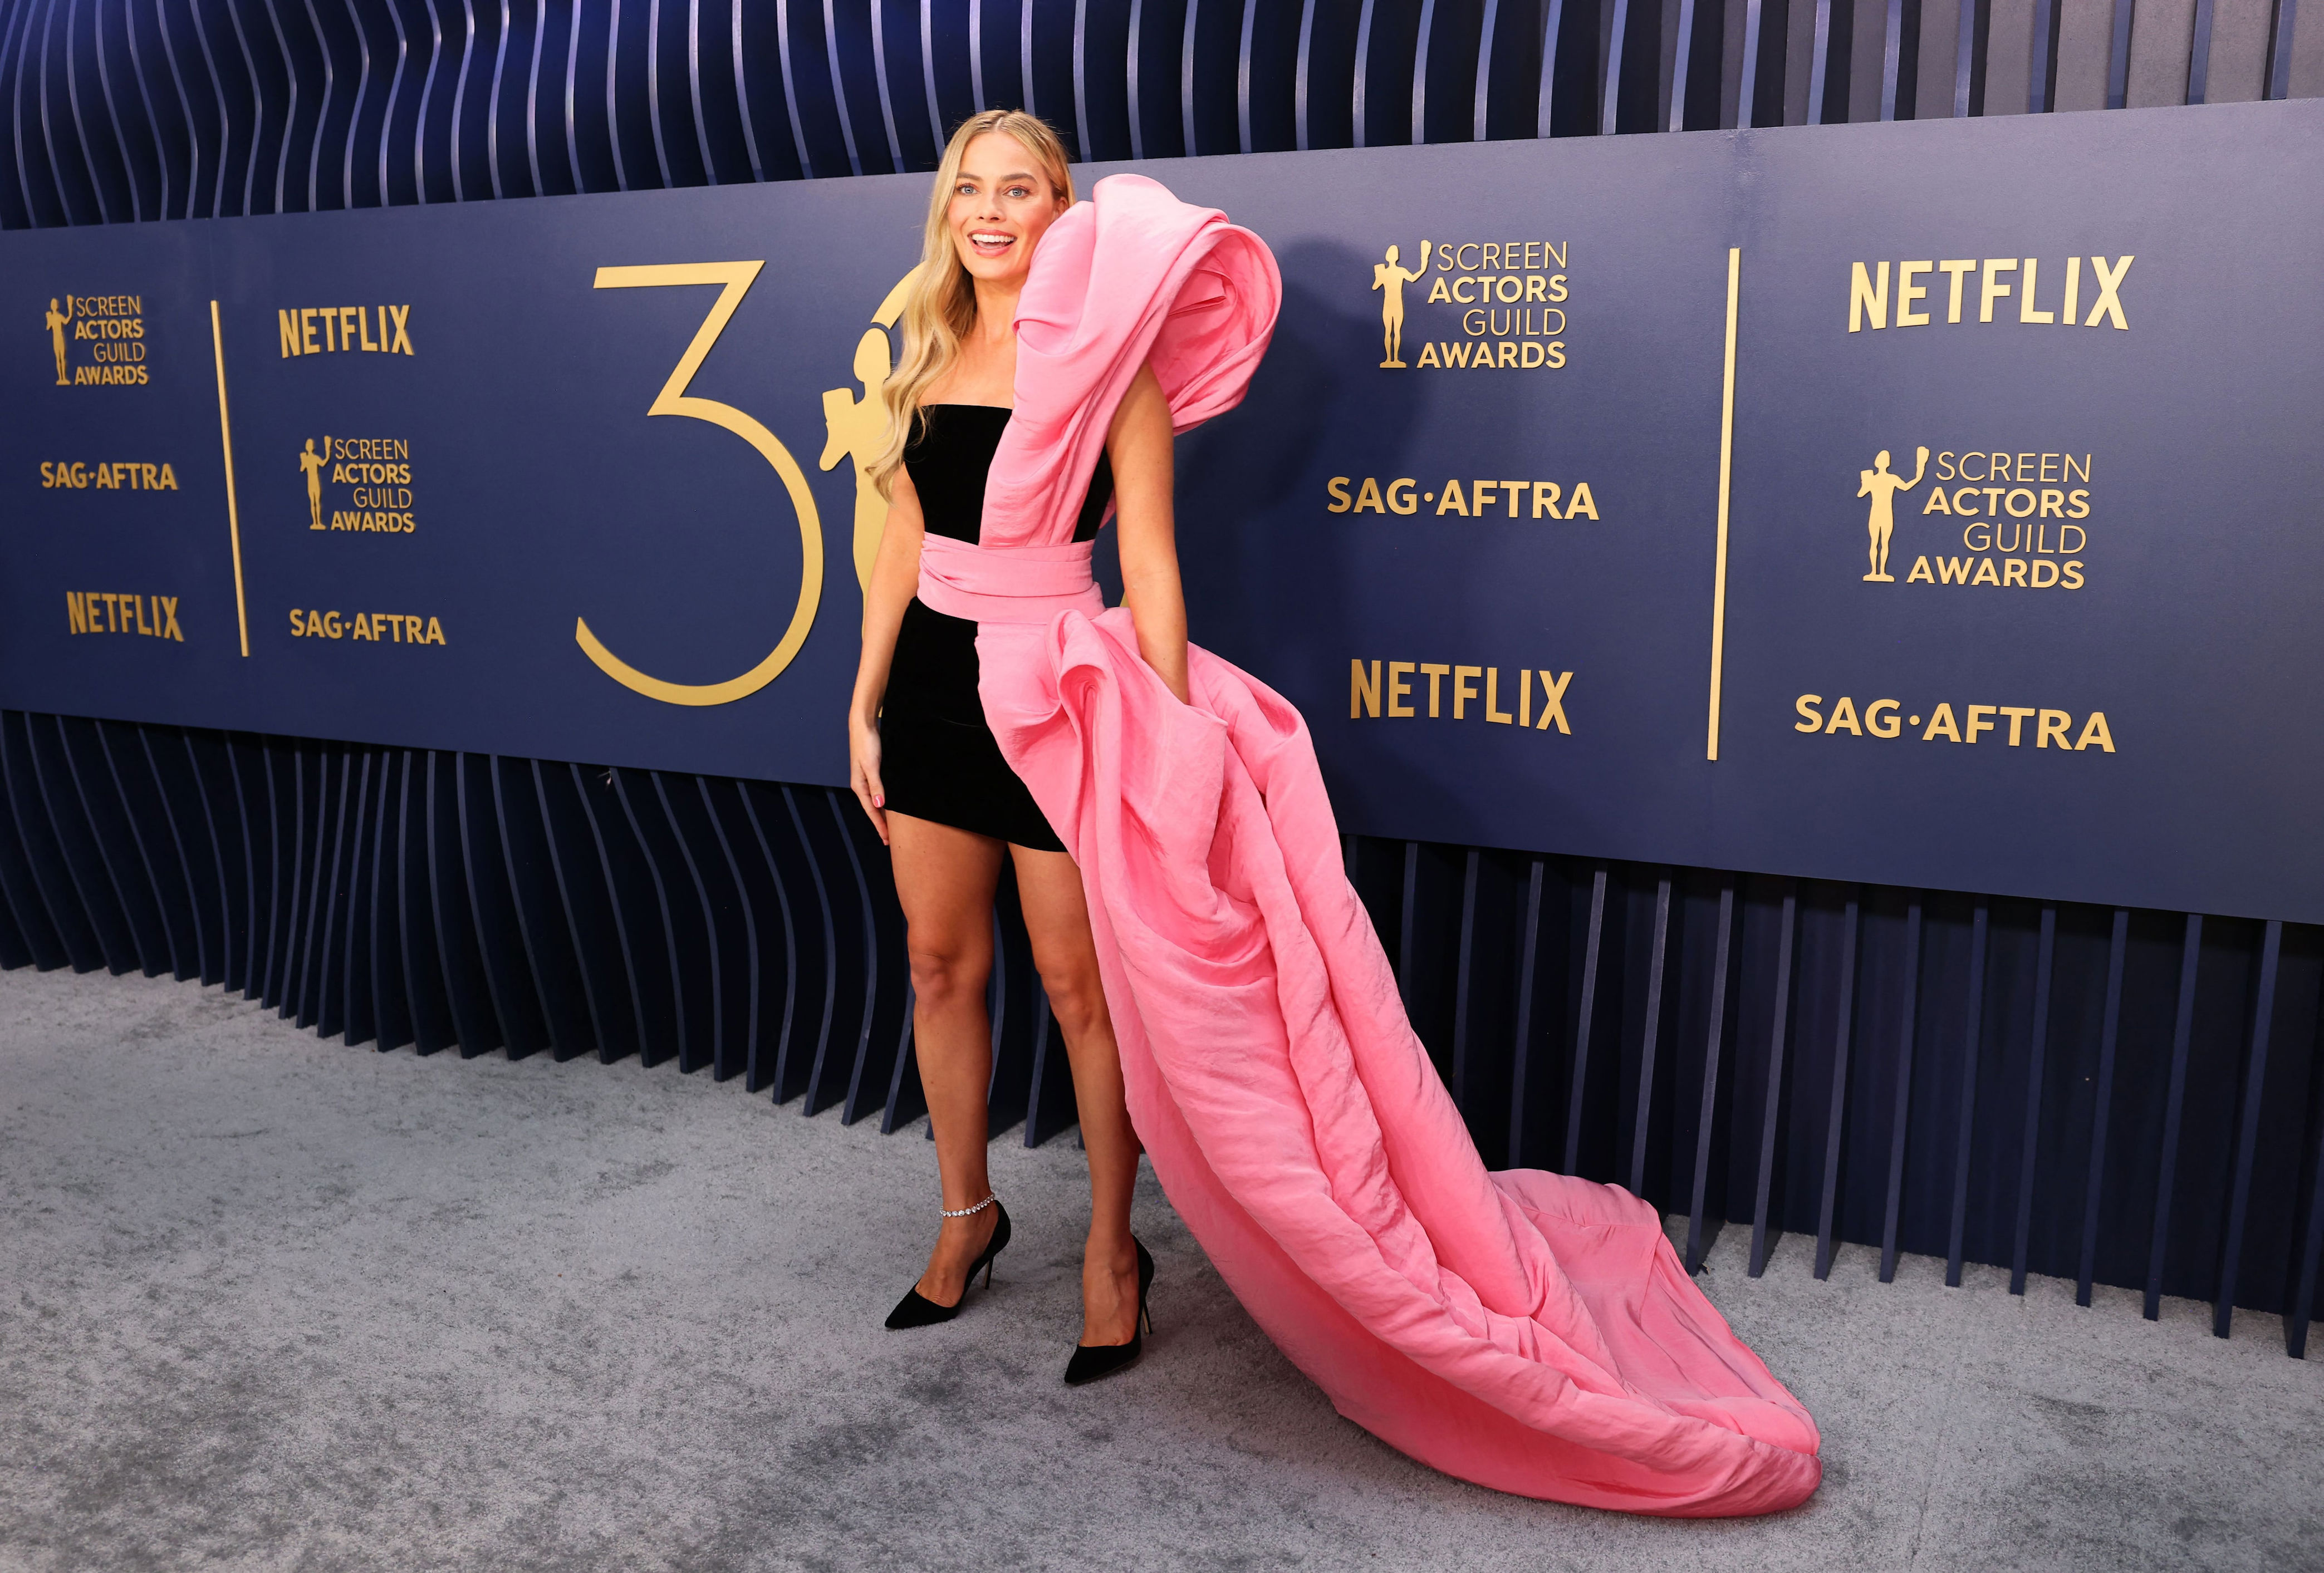 sag awards fashion: movie and tv stars swap picket signs for red carpet looks